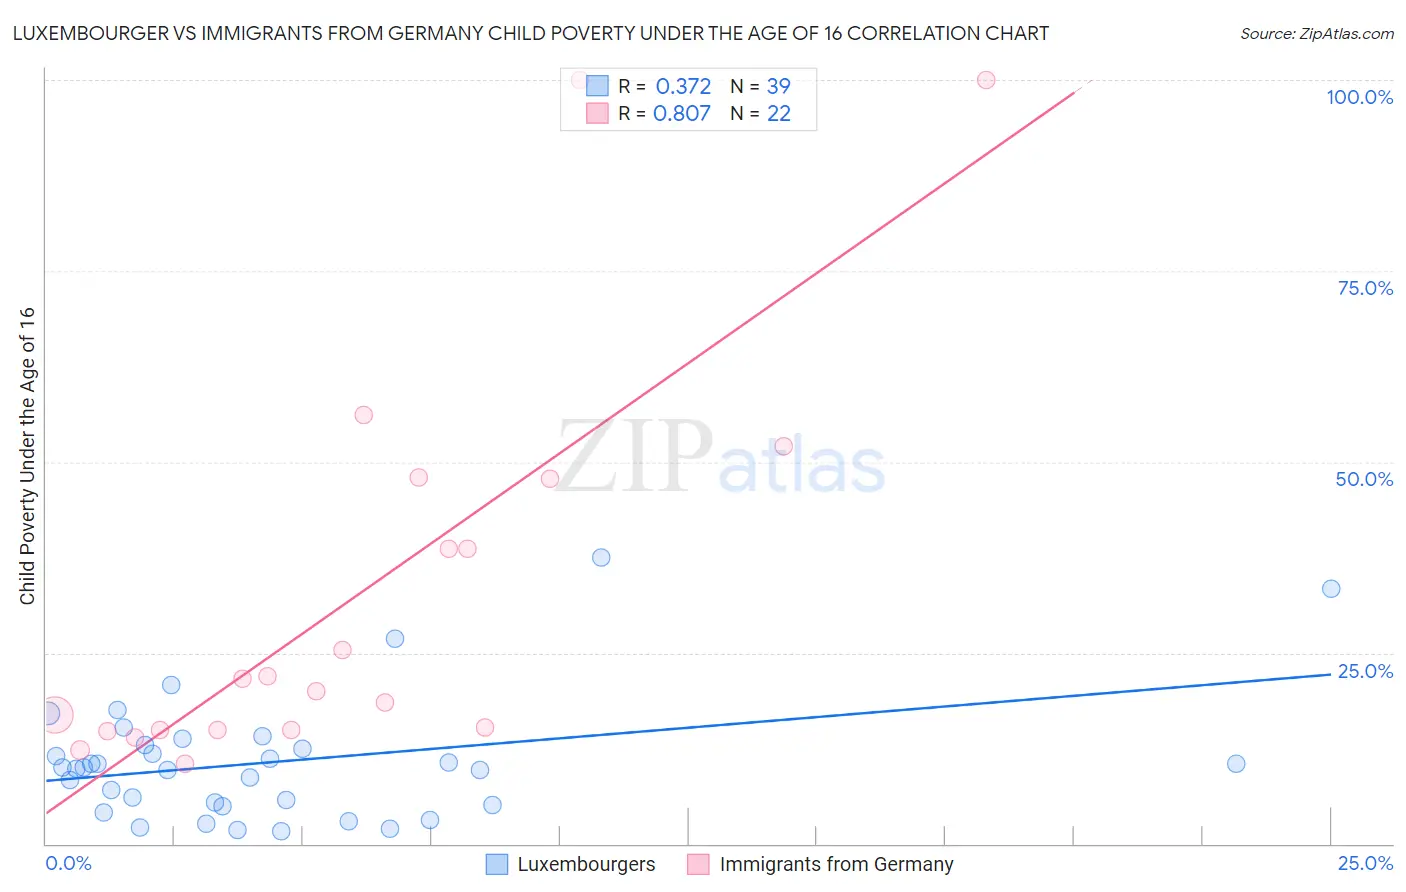 Luxembourger vs Immigrants from Germany Child Poverty Under the Age of 16